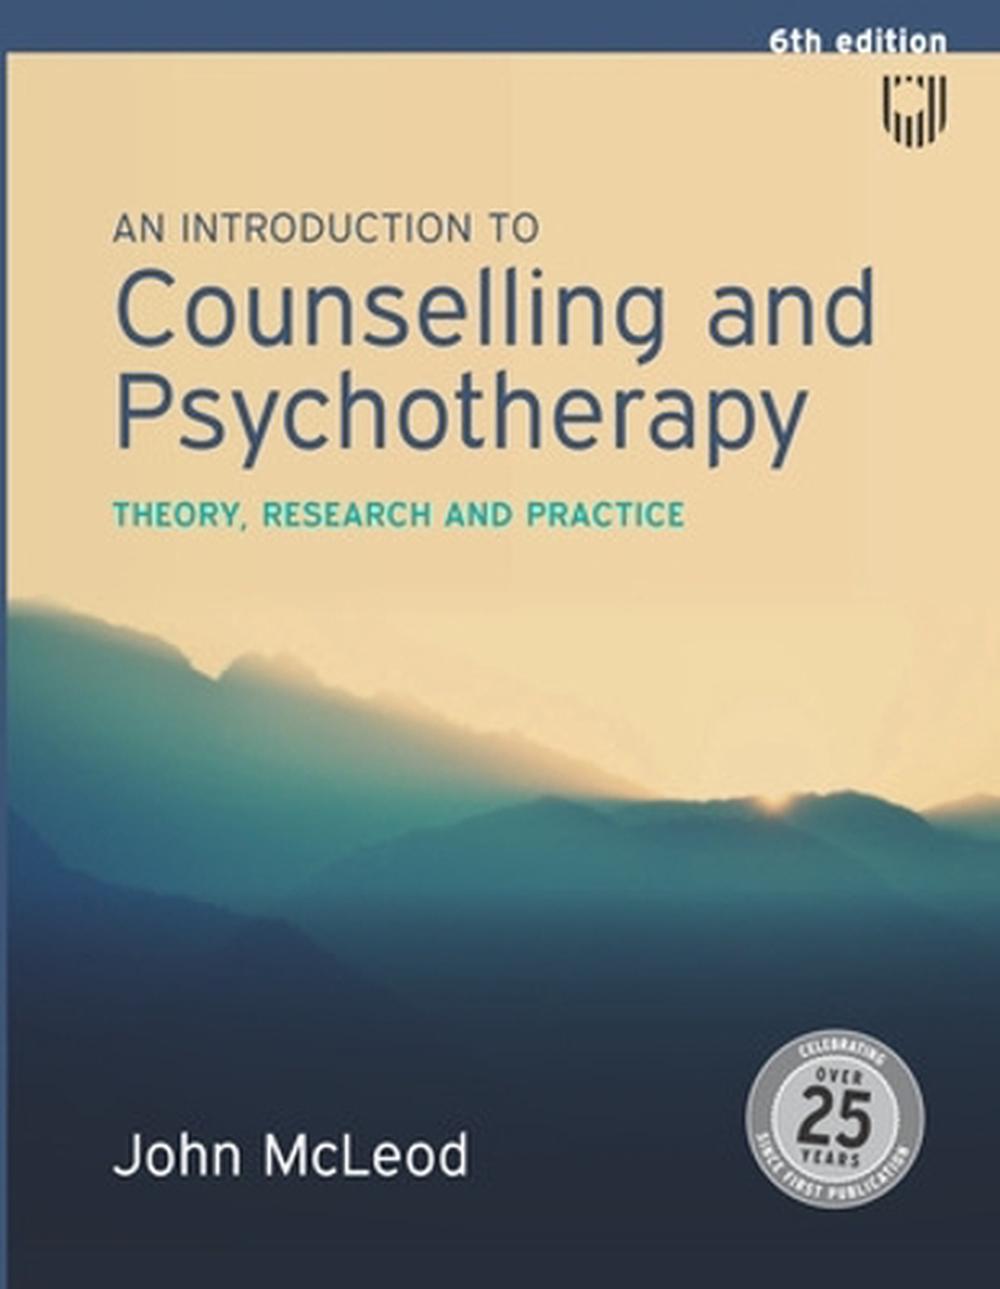 case study research in counselling and psychotherapy